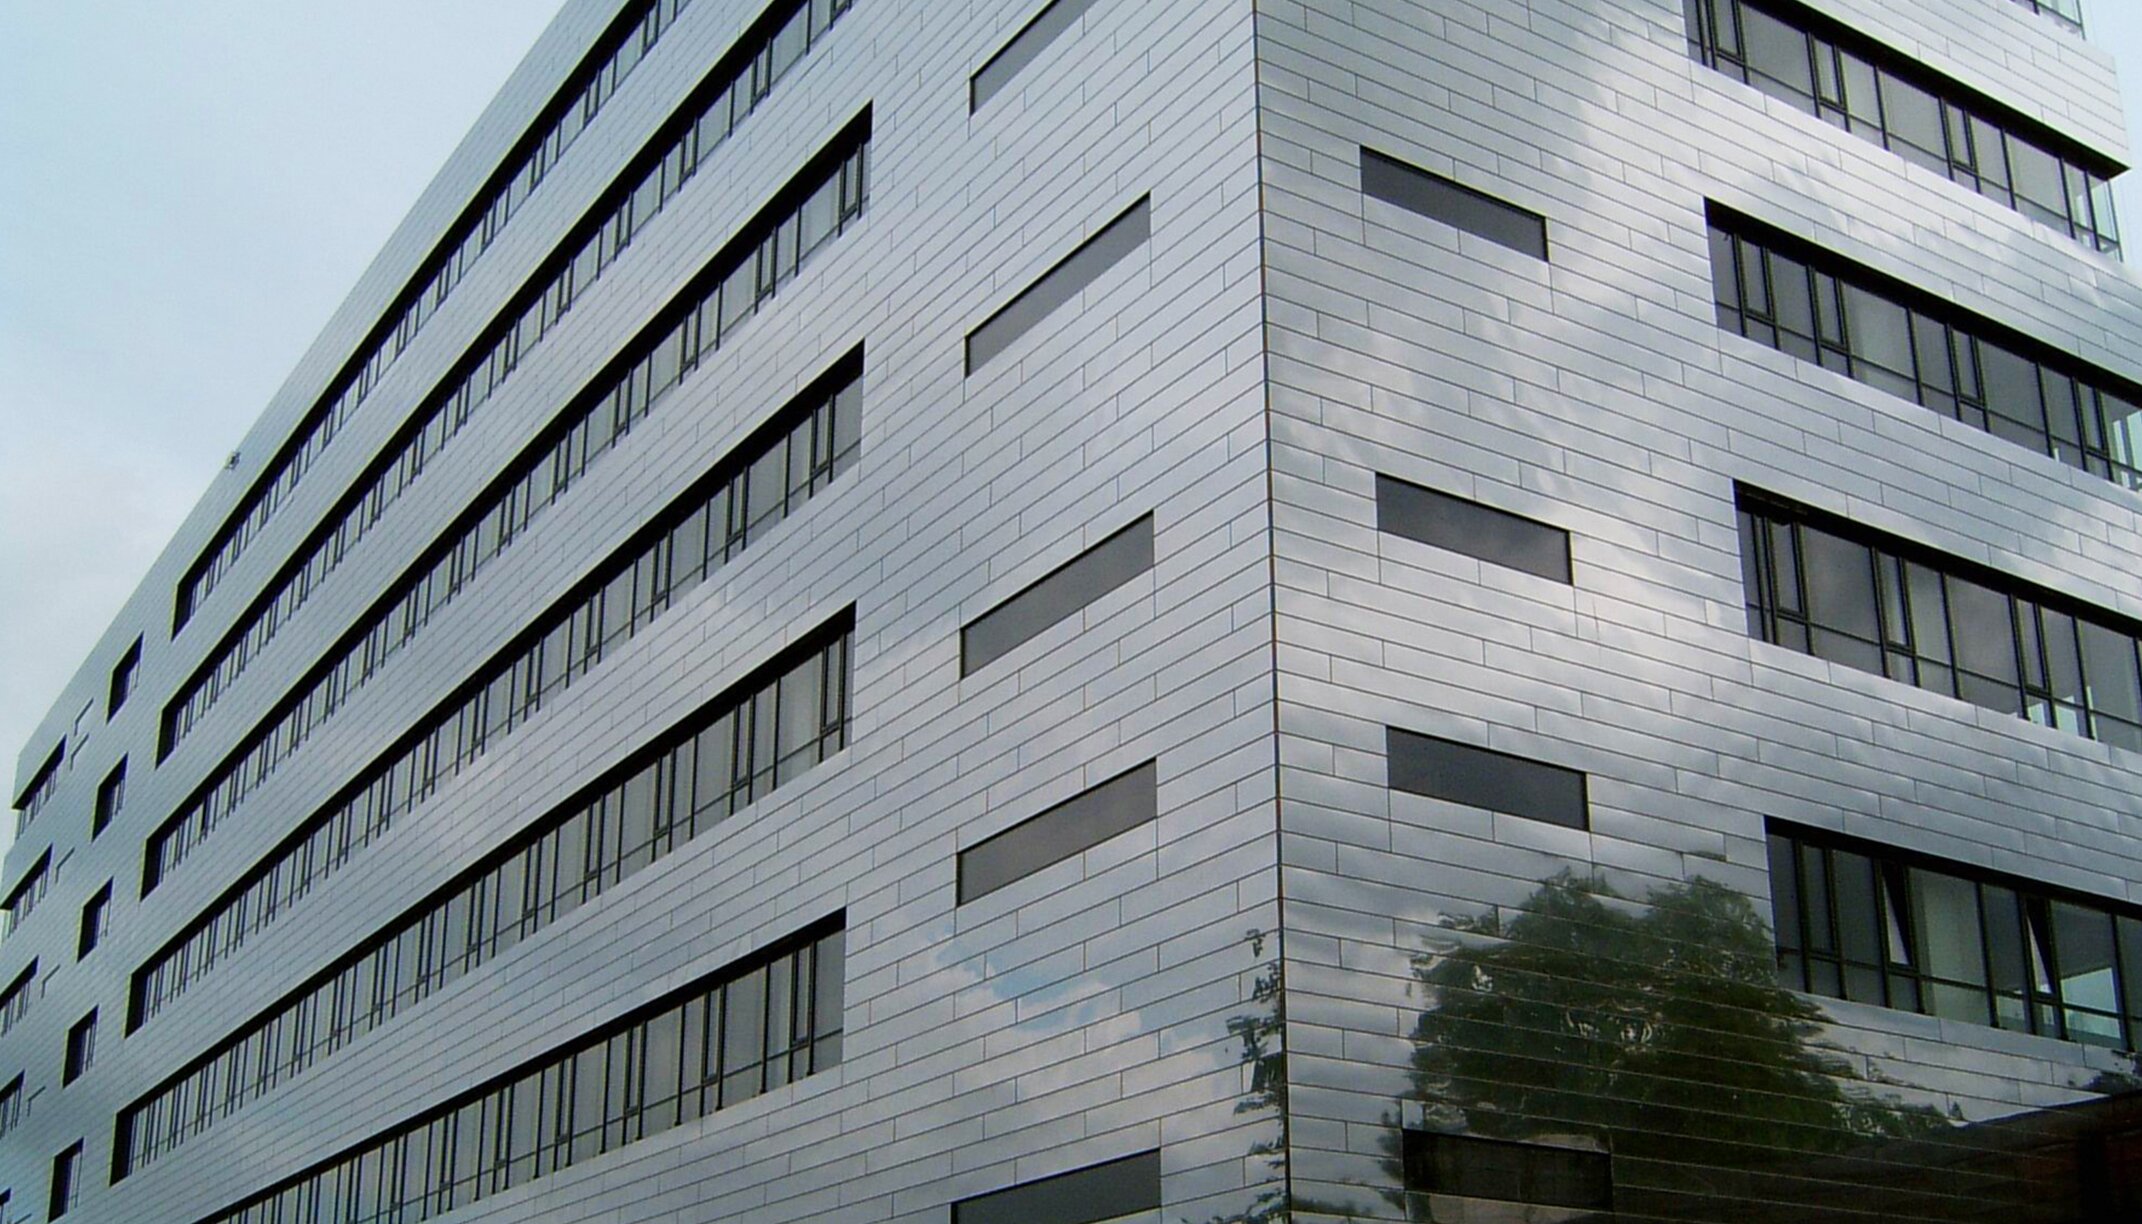 "Fronhofer Galeria"; innovative metal panels made of stainless steel